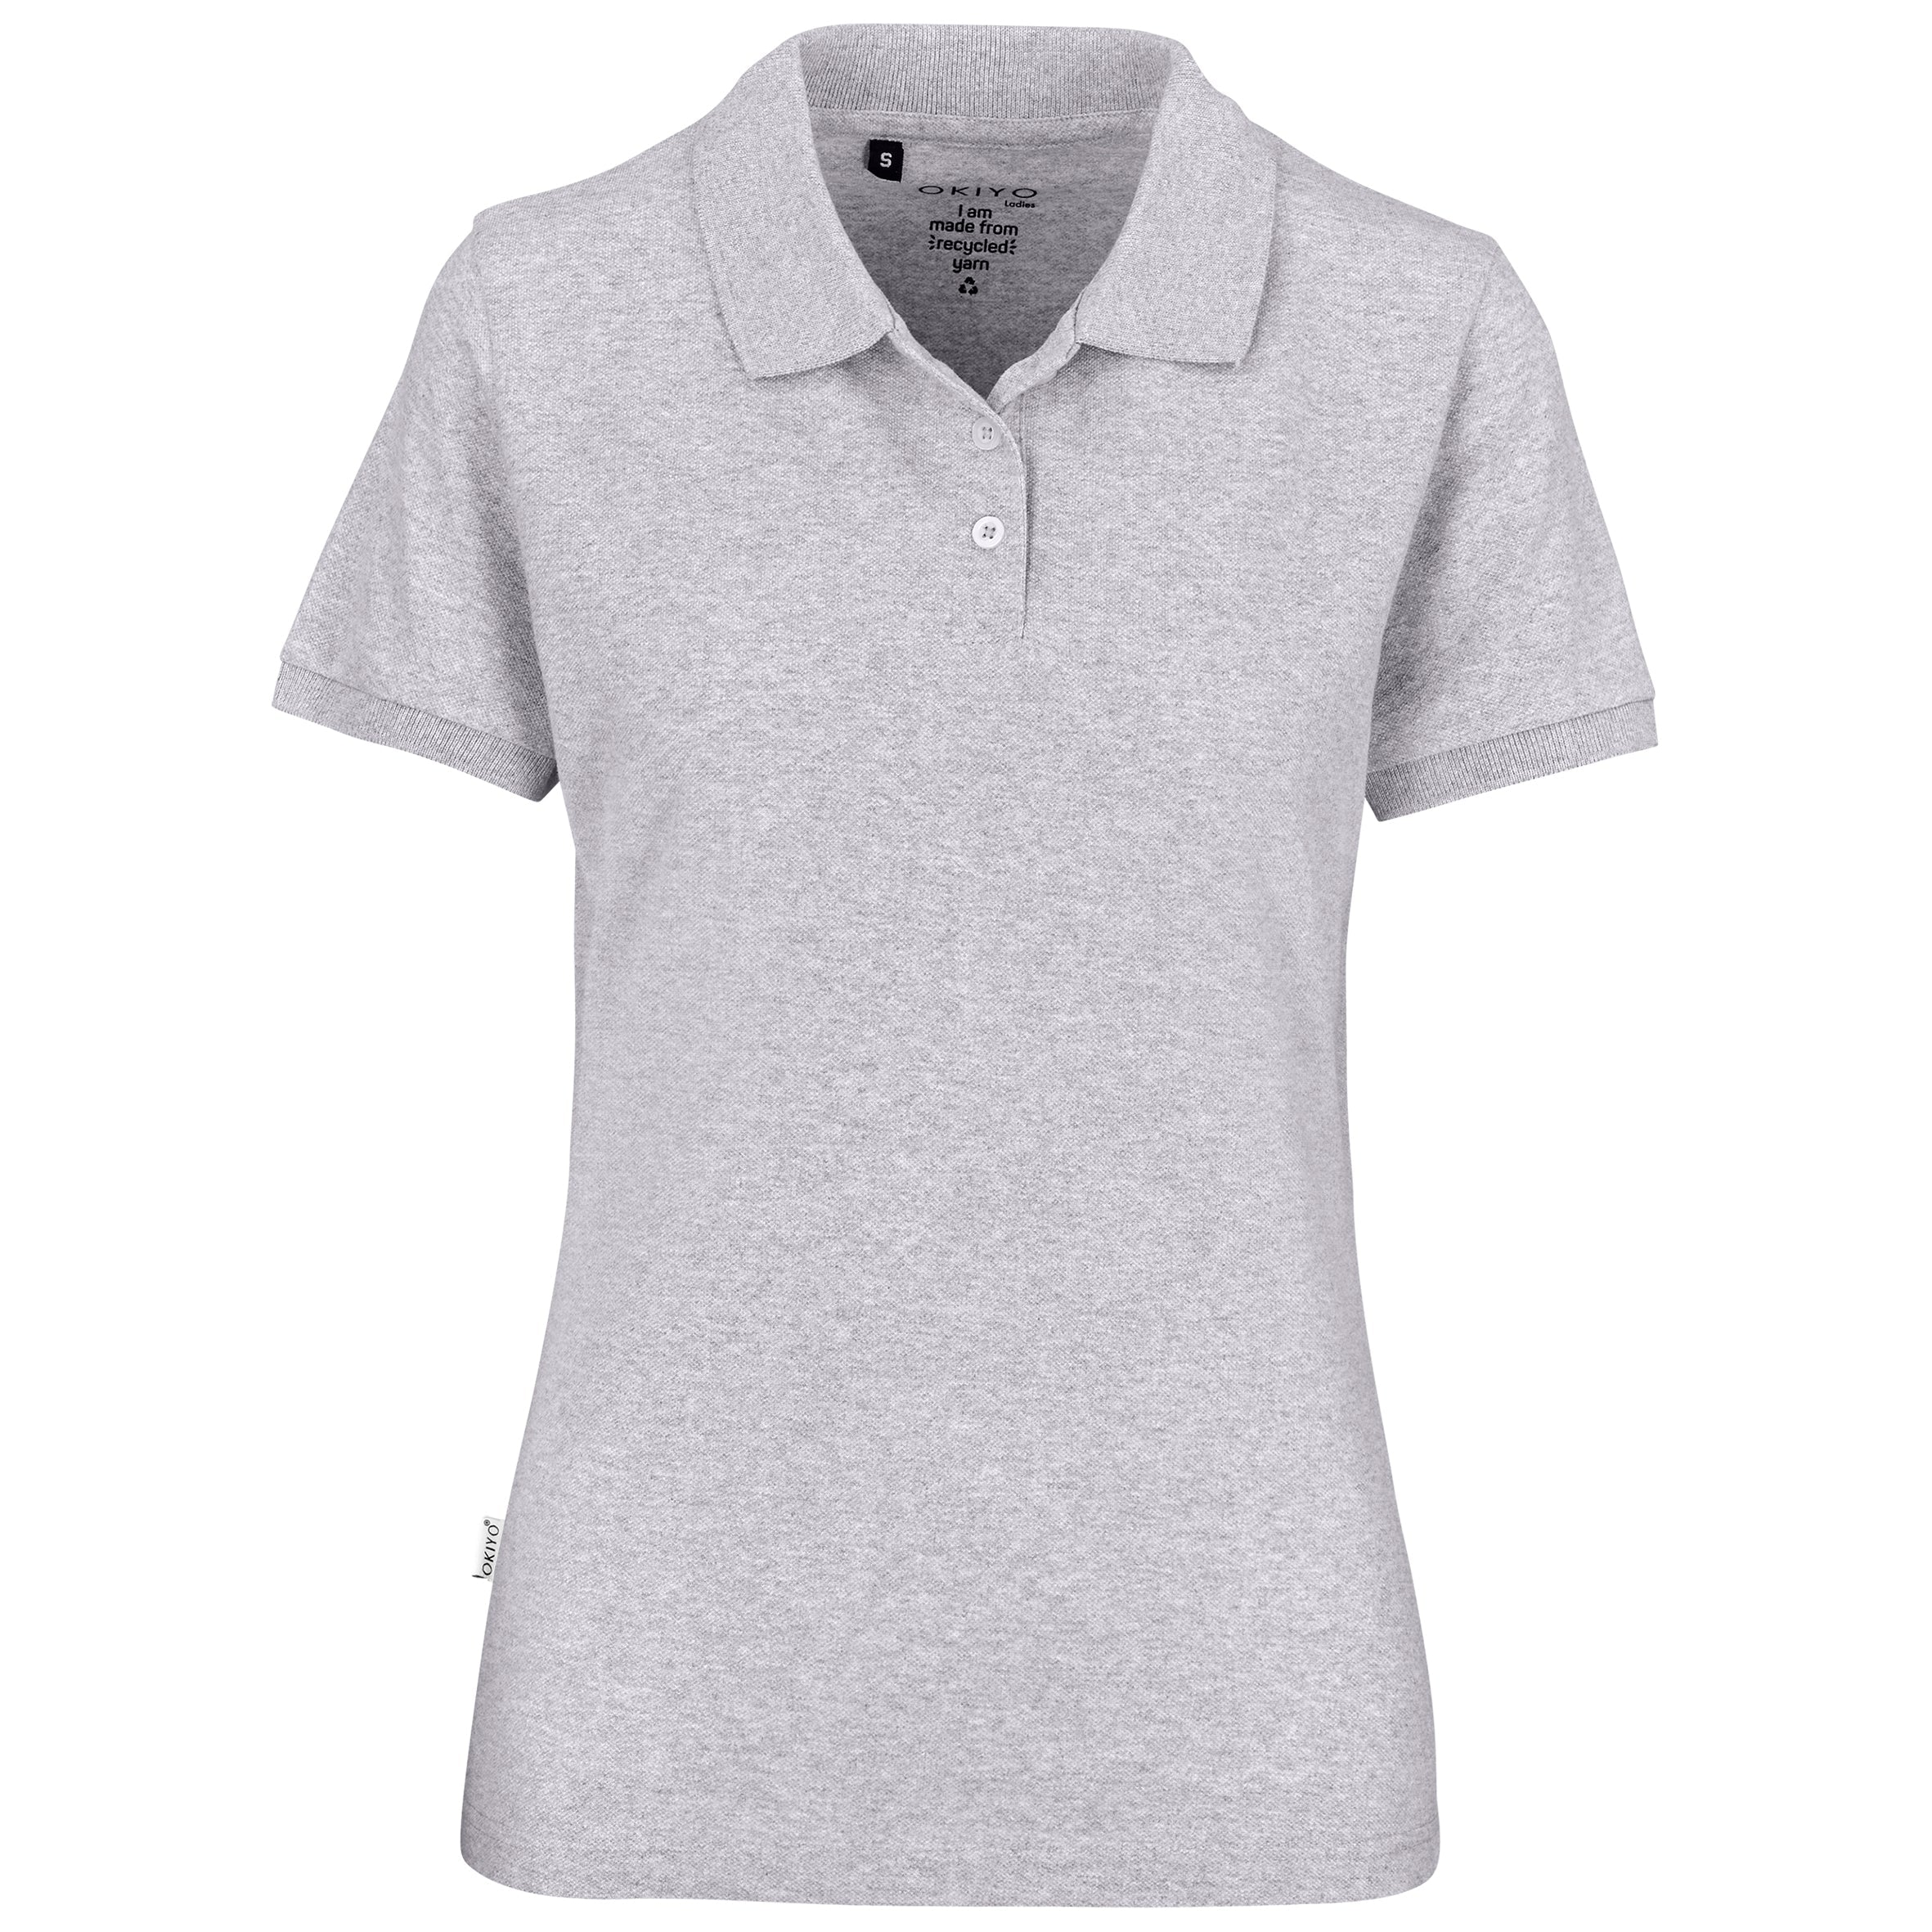 Ladies Recycled Golf Shirt L / Grey / GY